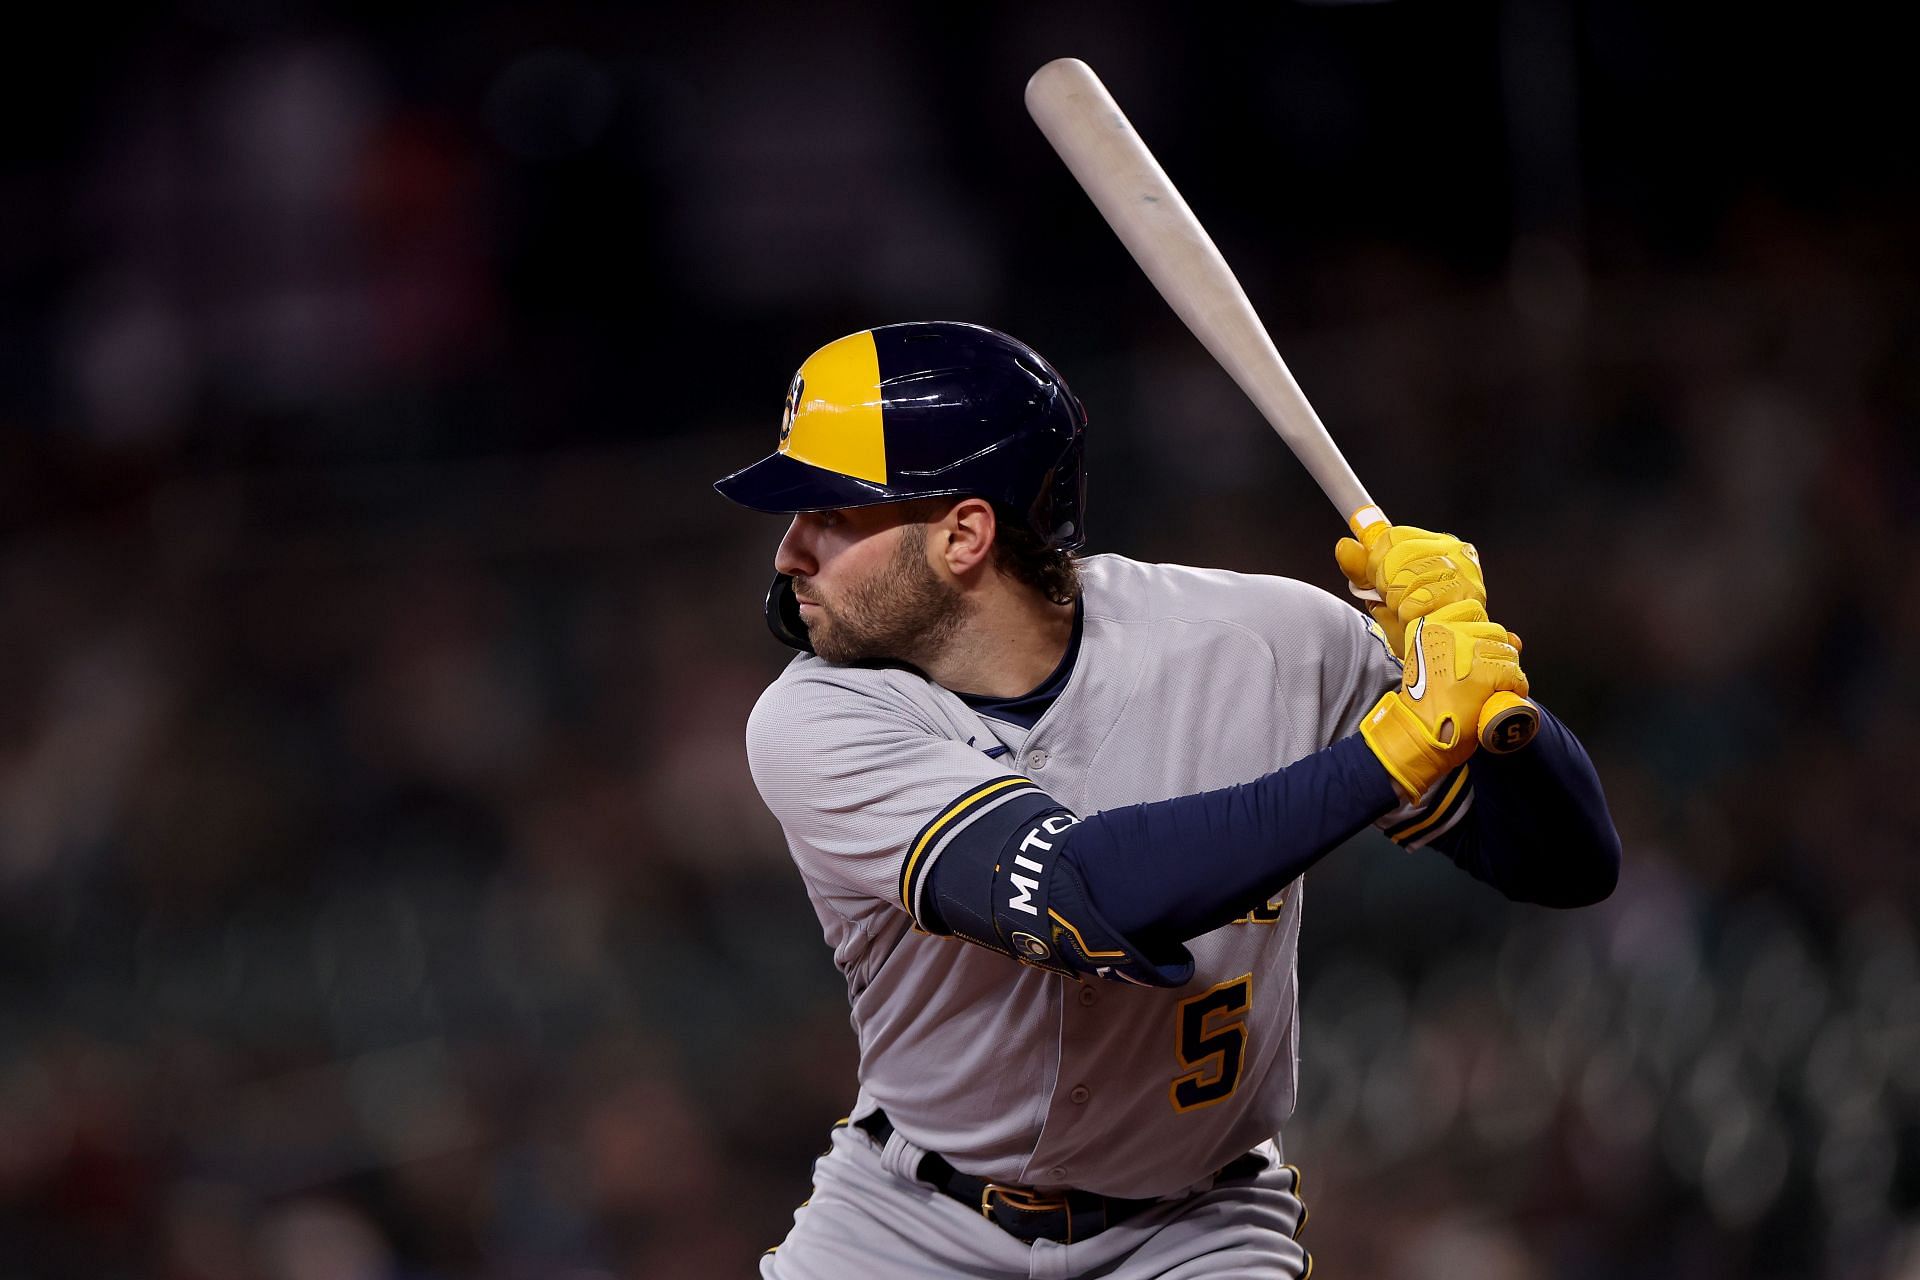 Garrett Mitchell returns to Brewers lineup from April shoulder injury, Brewers